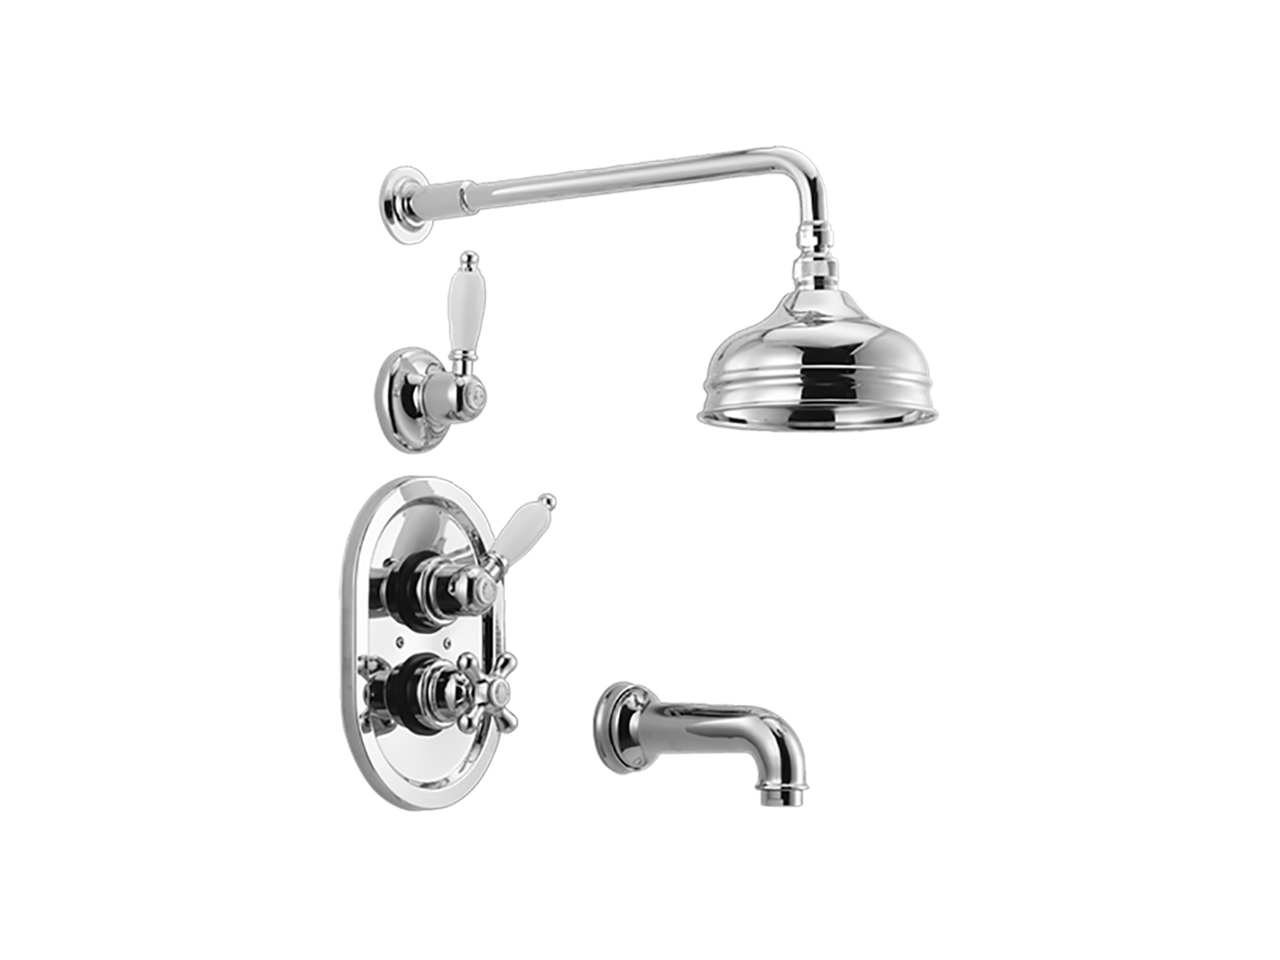 HUBERConcealed thermostatic bath mixer CROISETTE